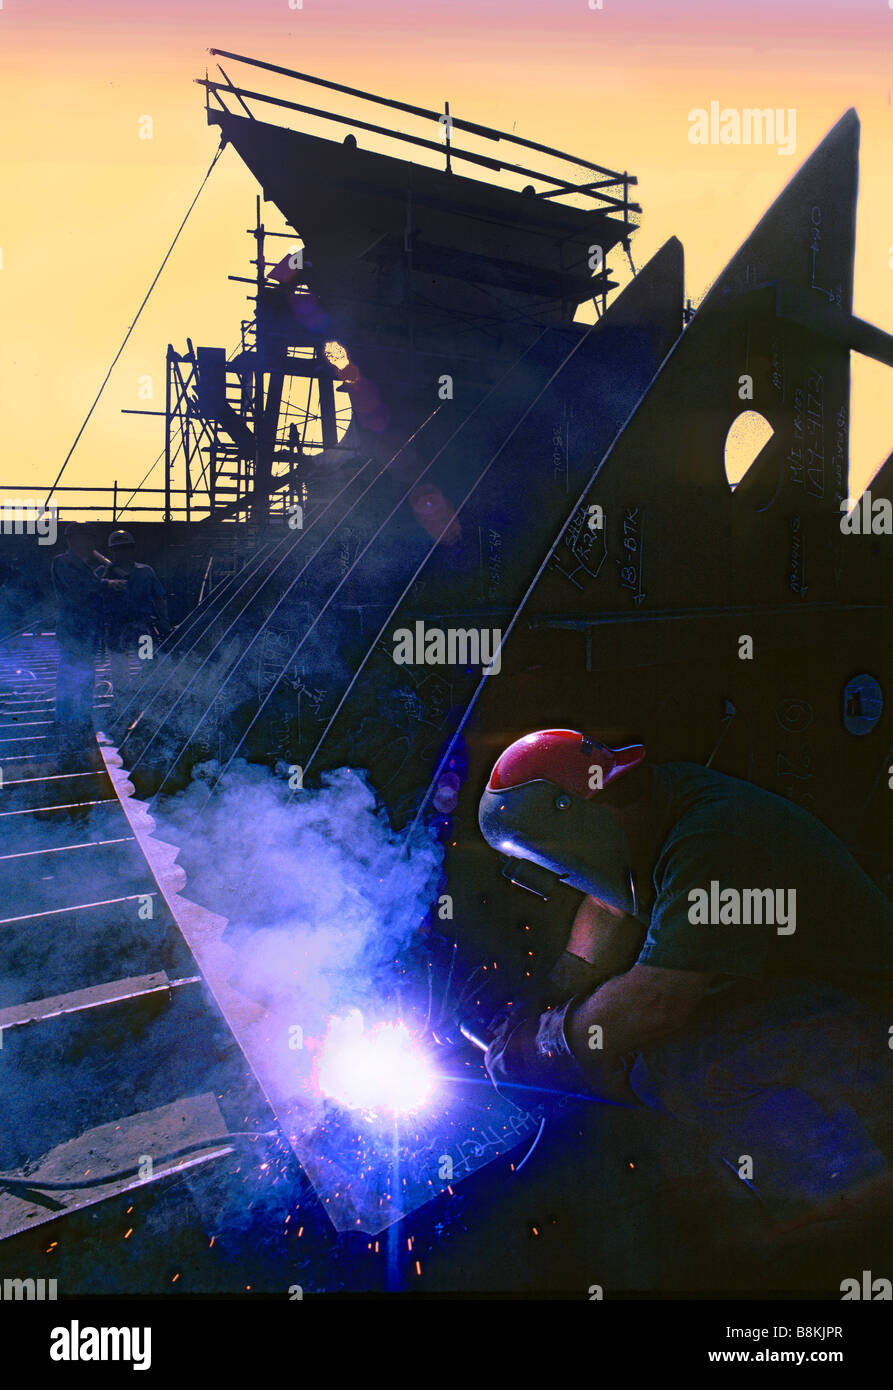 Welder welding structural steel during construction of ship at California shipbuilding yard. Stock Photo